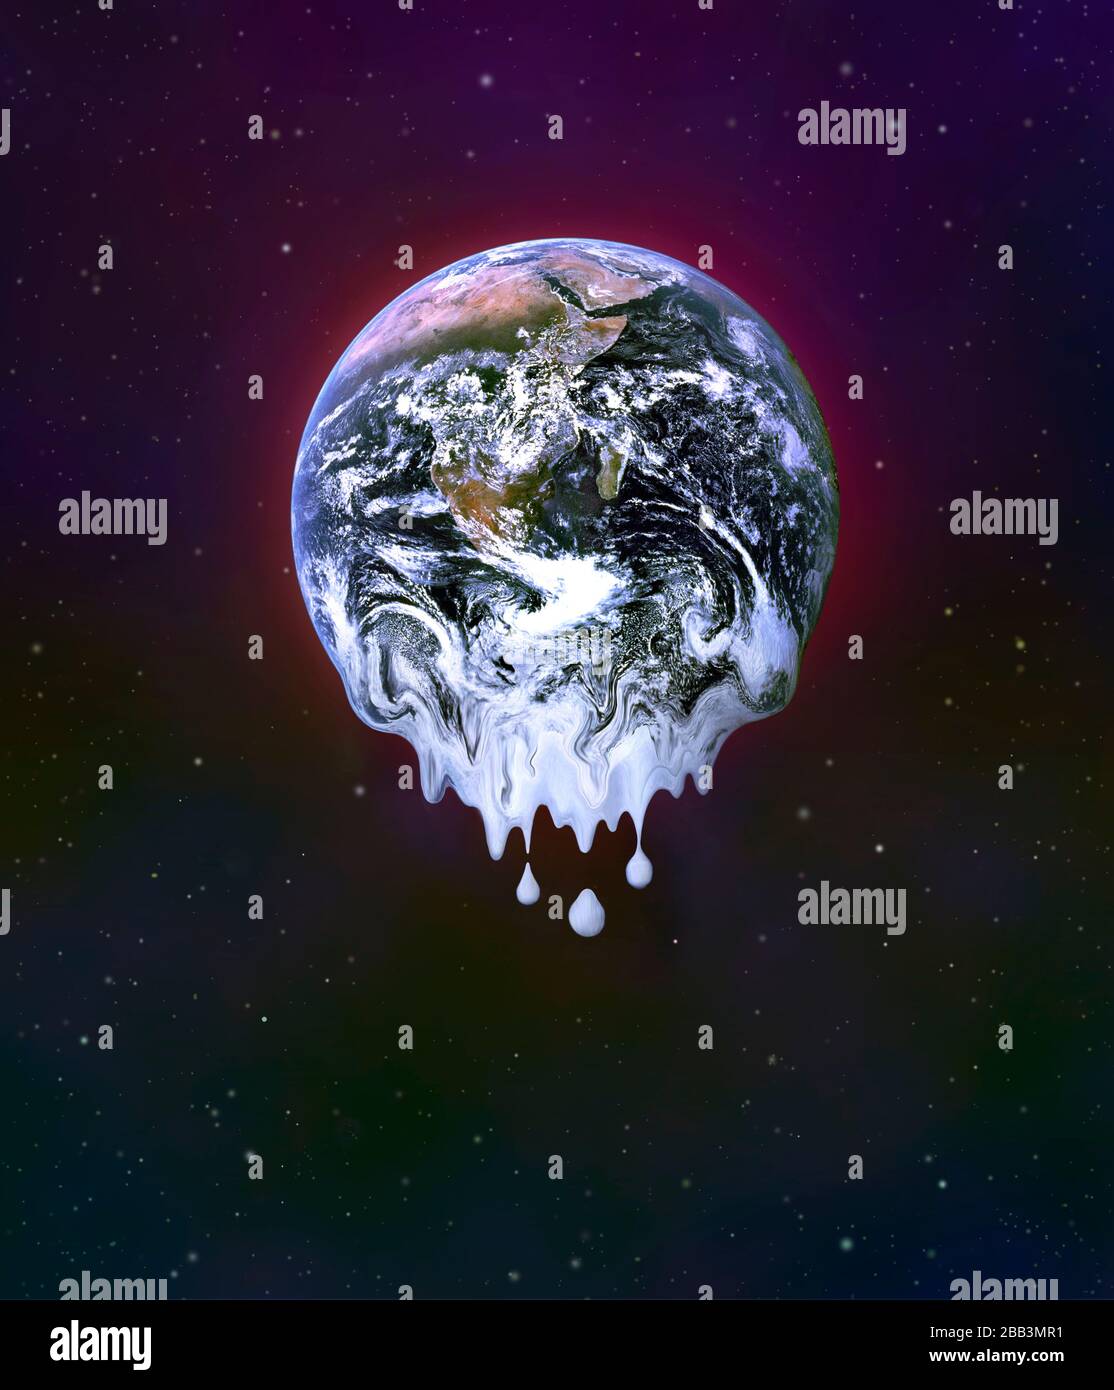 Global warming as seen from space! A digital image of Planet Earth warming up and the Antarctic ice melting. Stock Photo